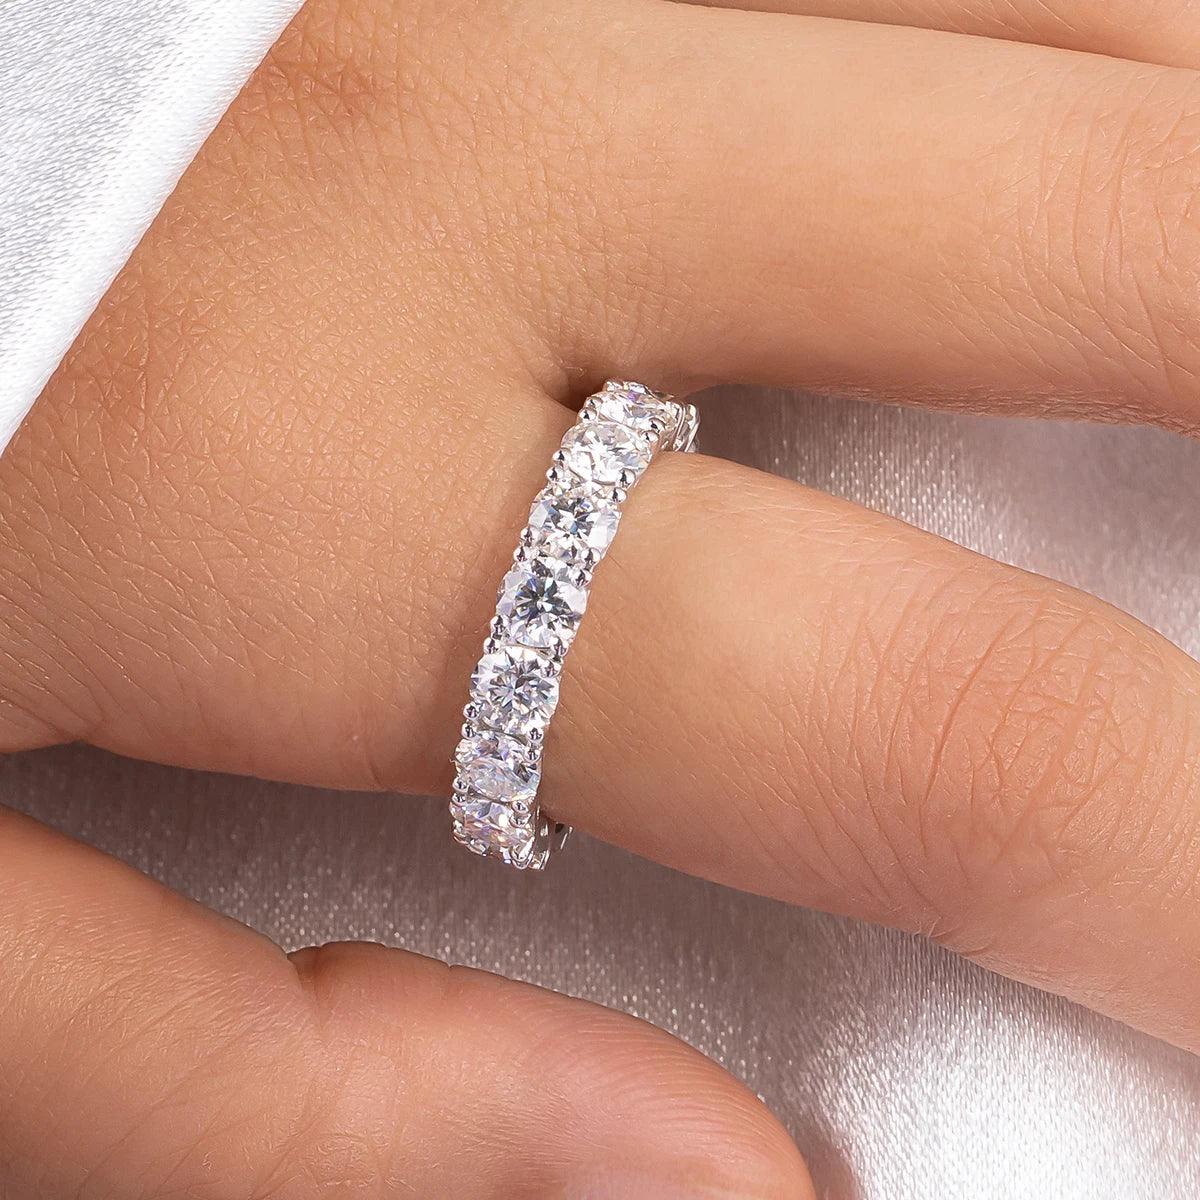 Captivating 4mm D Colour Moissanite Diamonds Eternity Rings - 925 Sterling Silver Wedding Engagement Rings - The Jewellery Supermarket